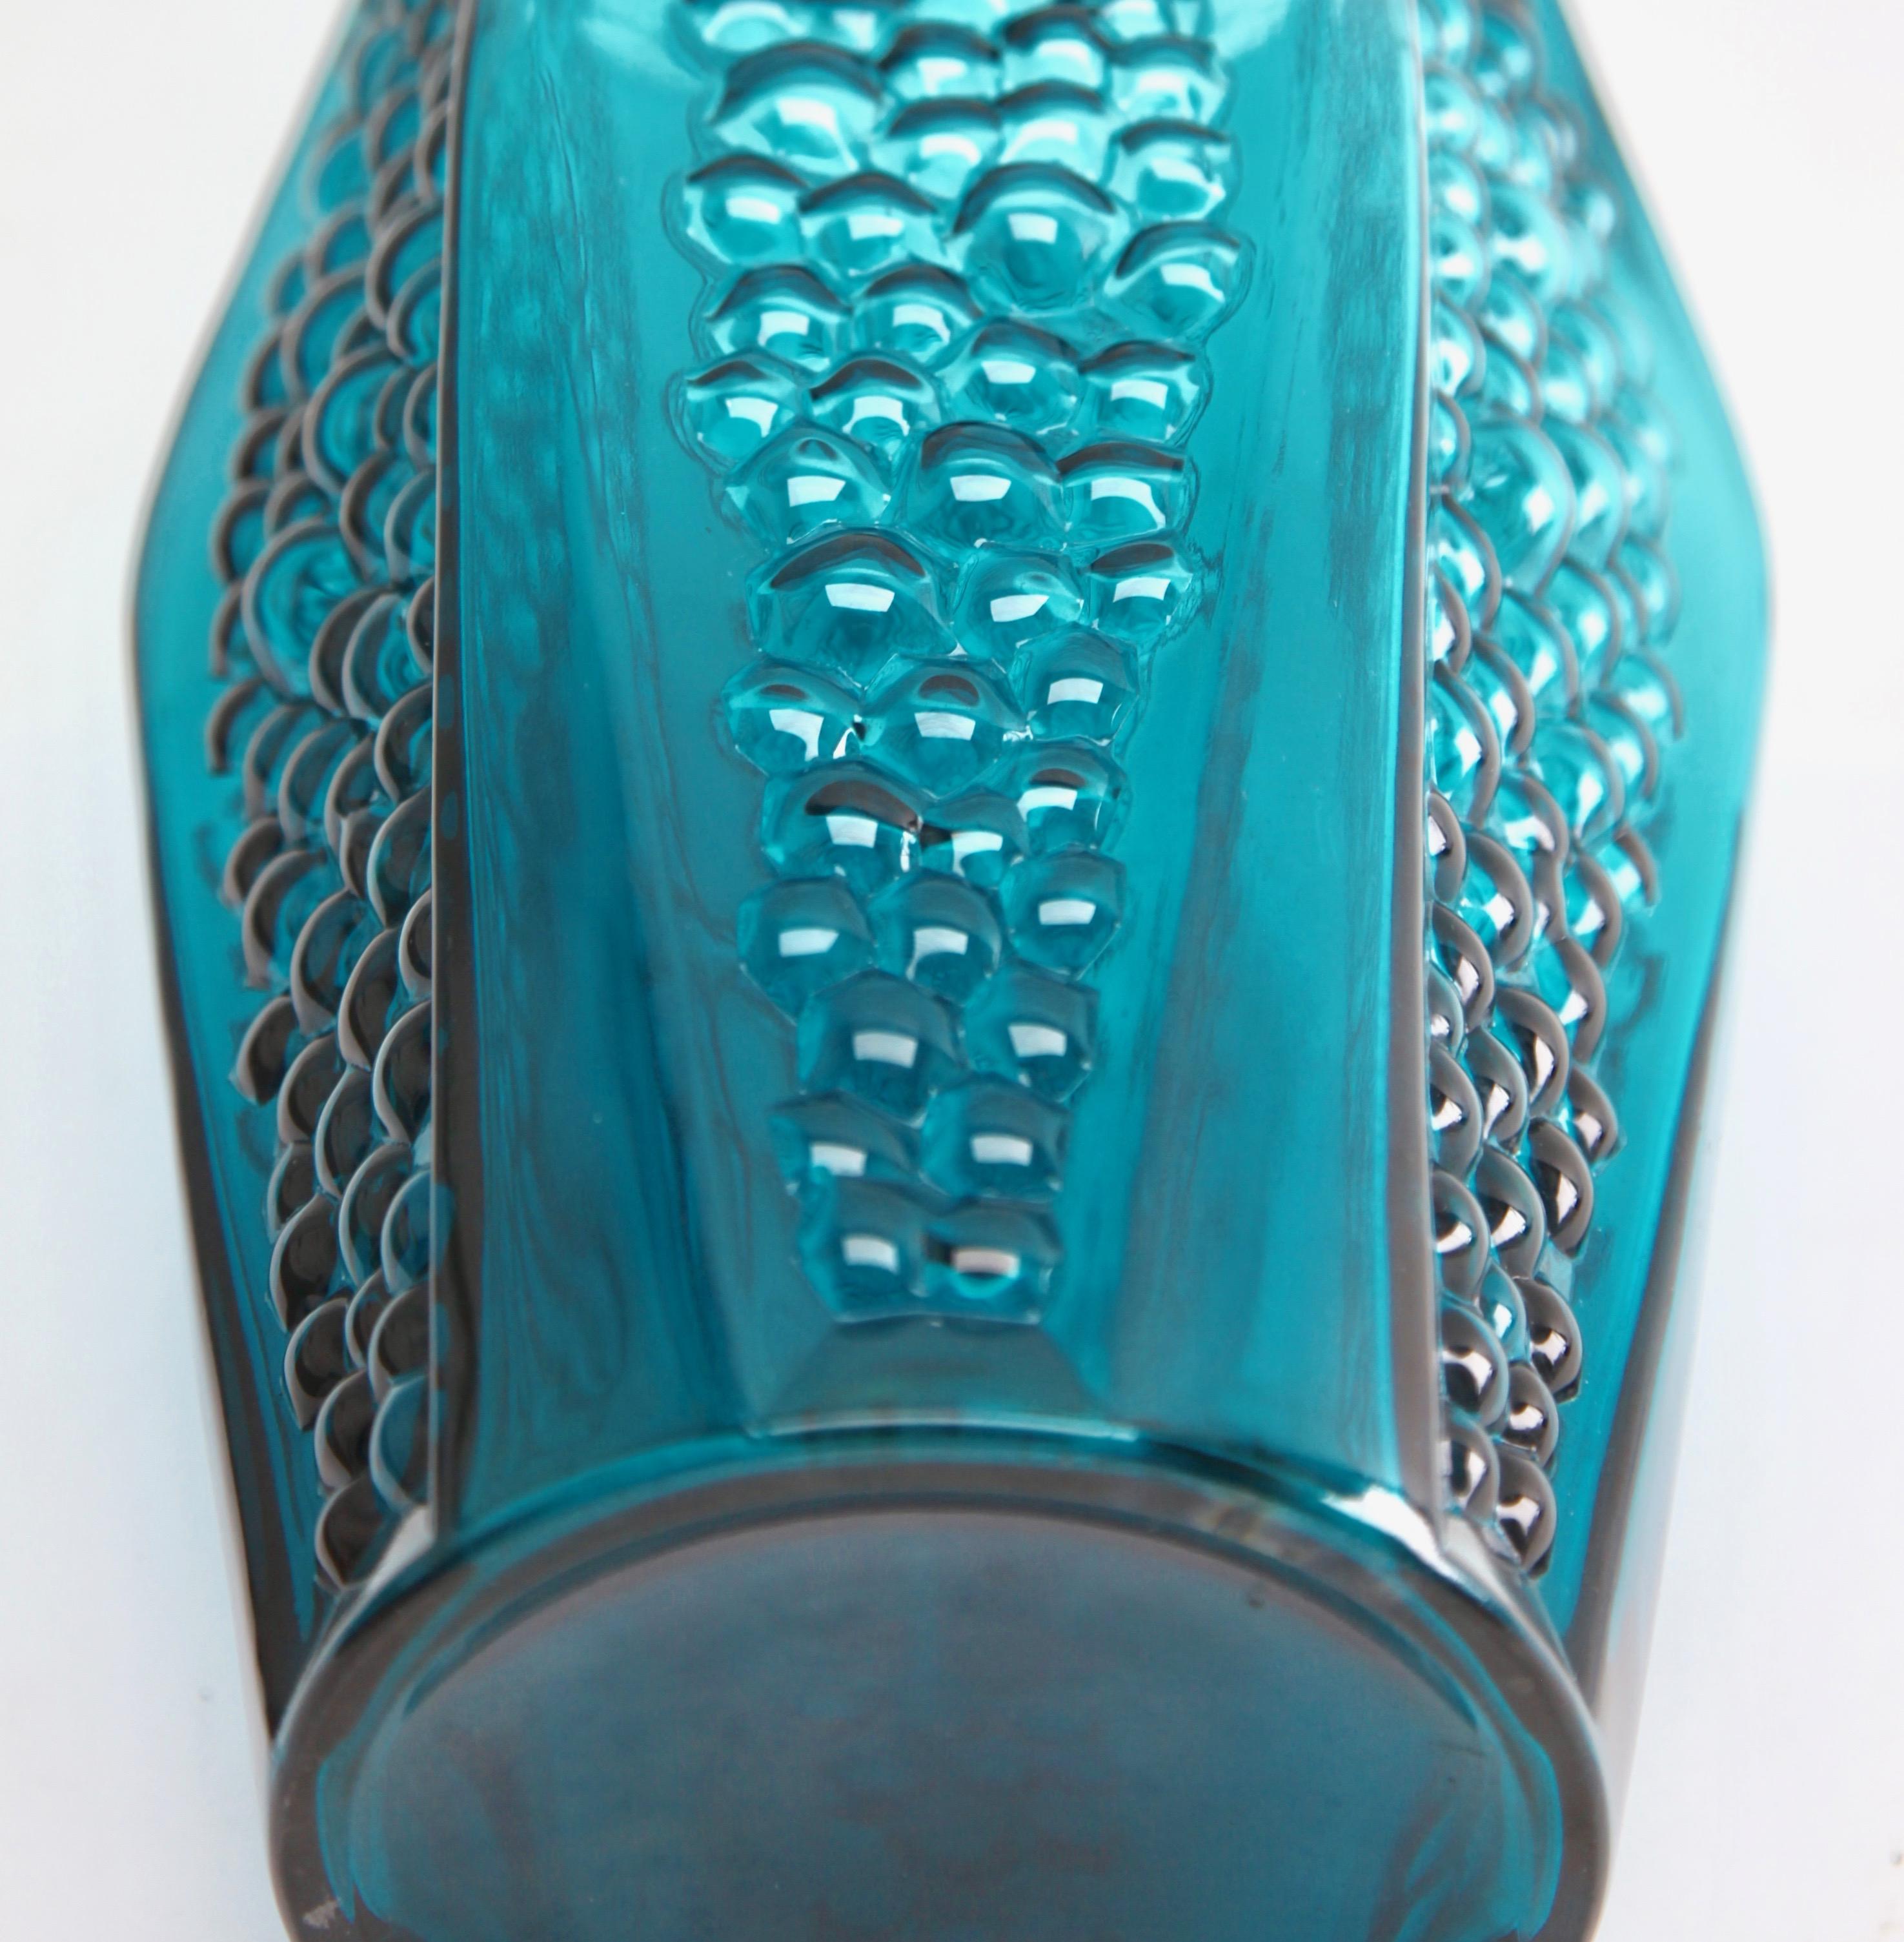 Polish Stolle-Nieman 'Attributed' Hexagonal Vase with Bubbled Texture, 1970s For Sale